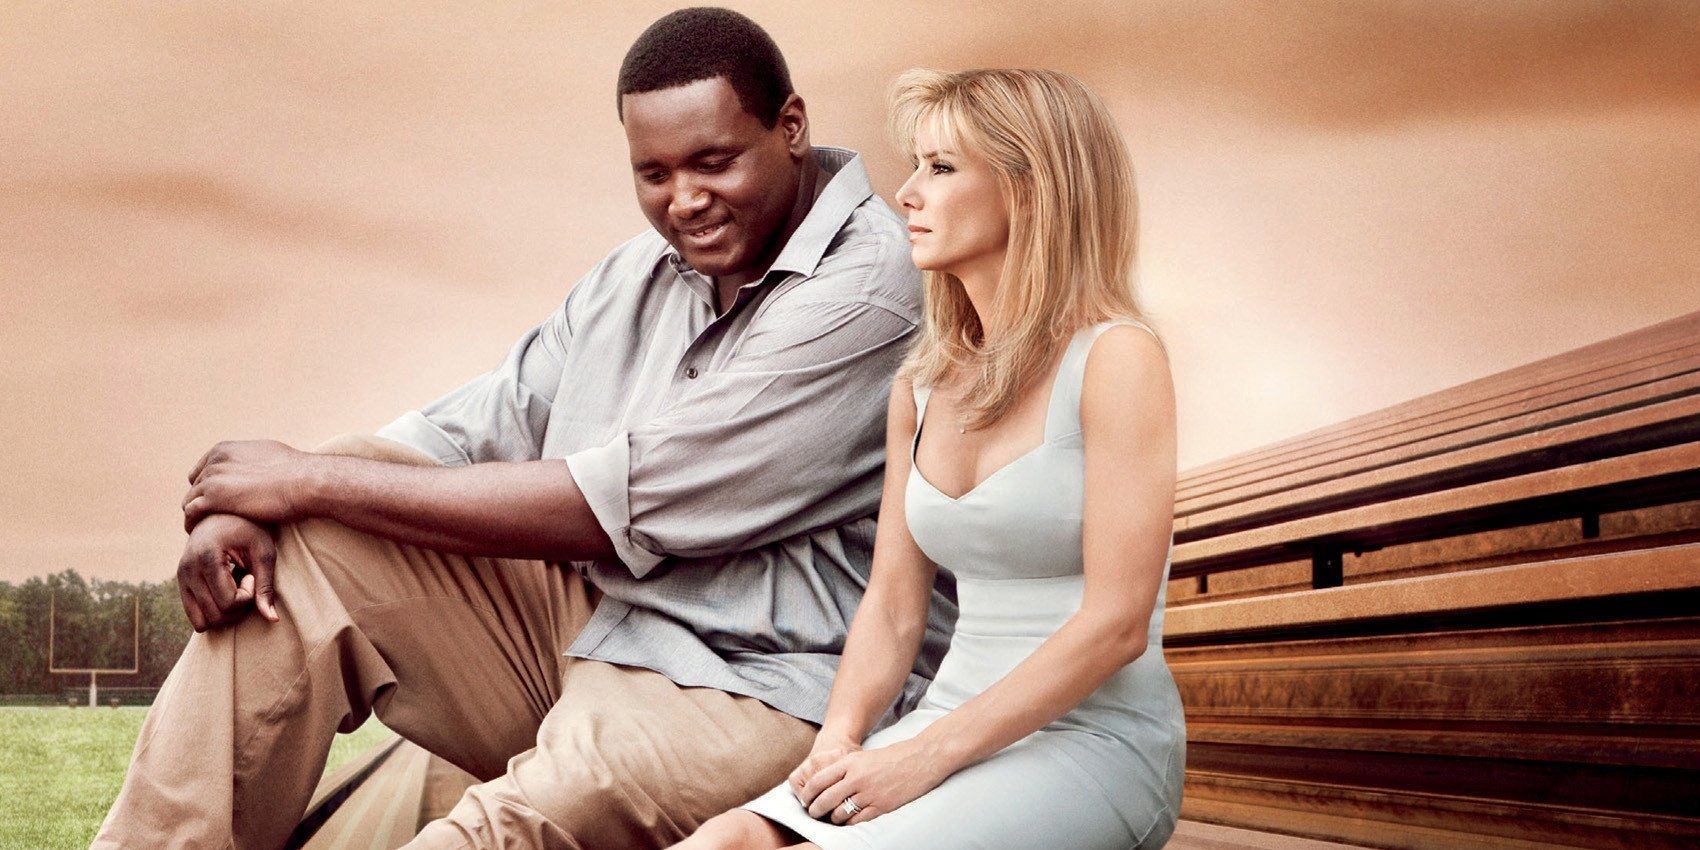 The poster for The Blind Side